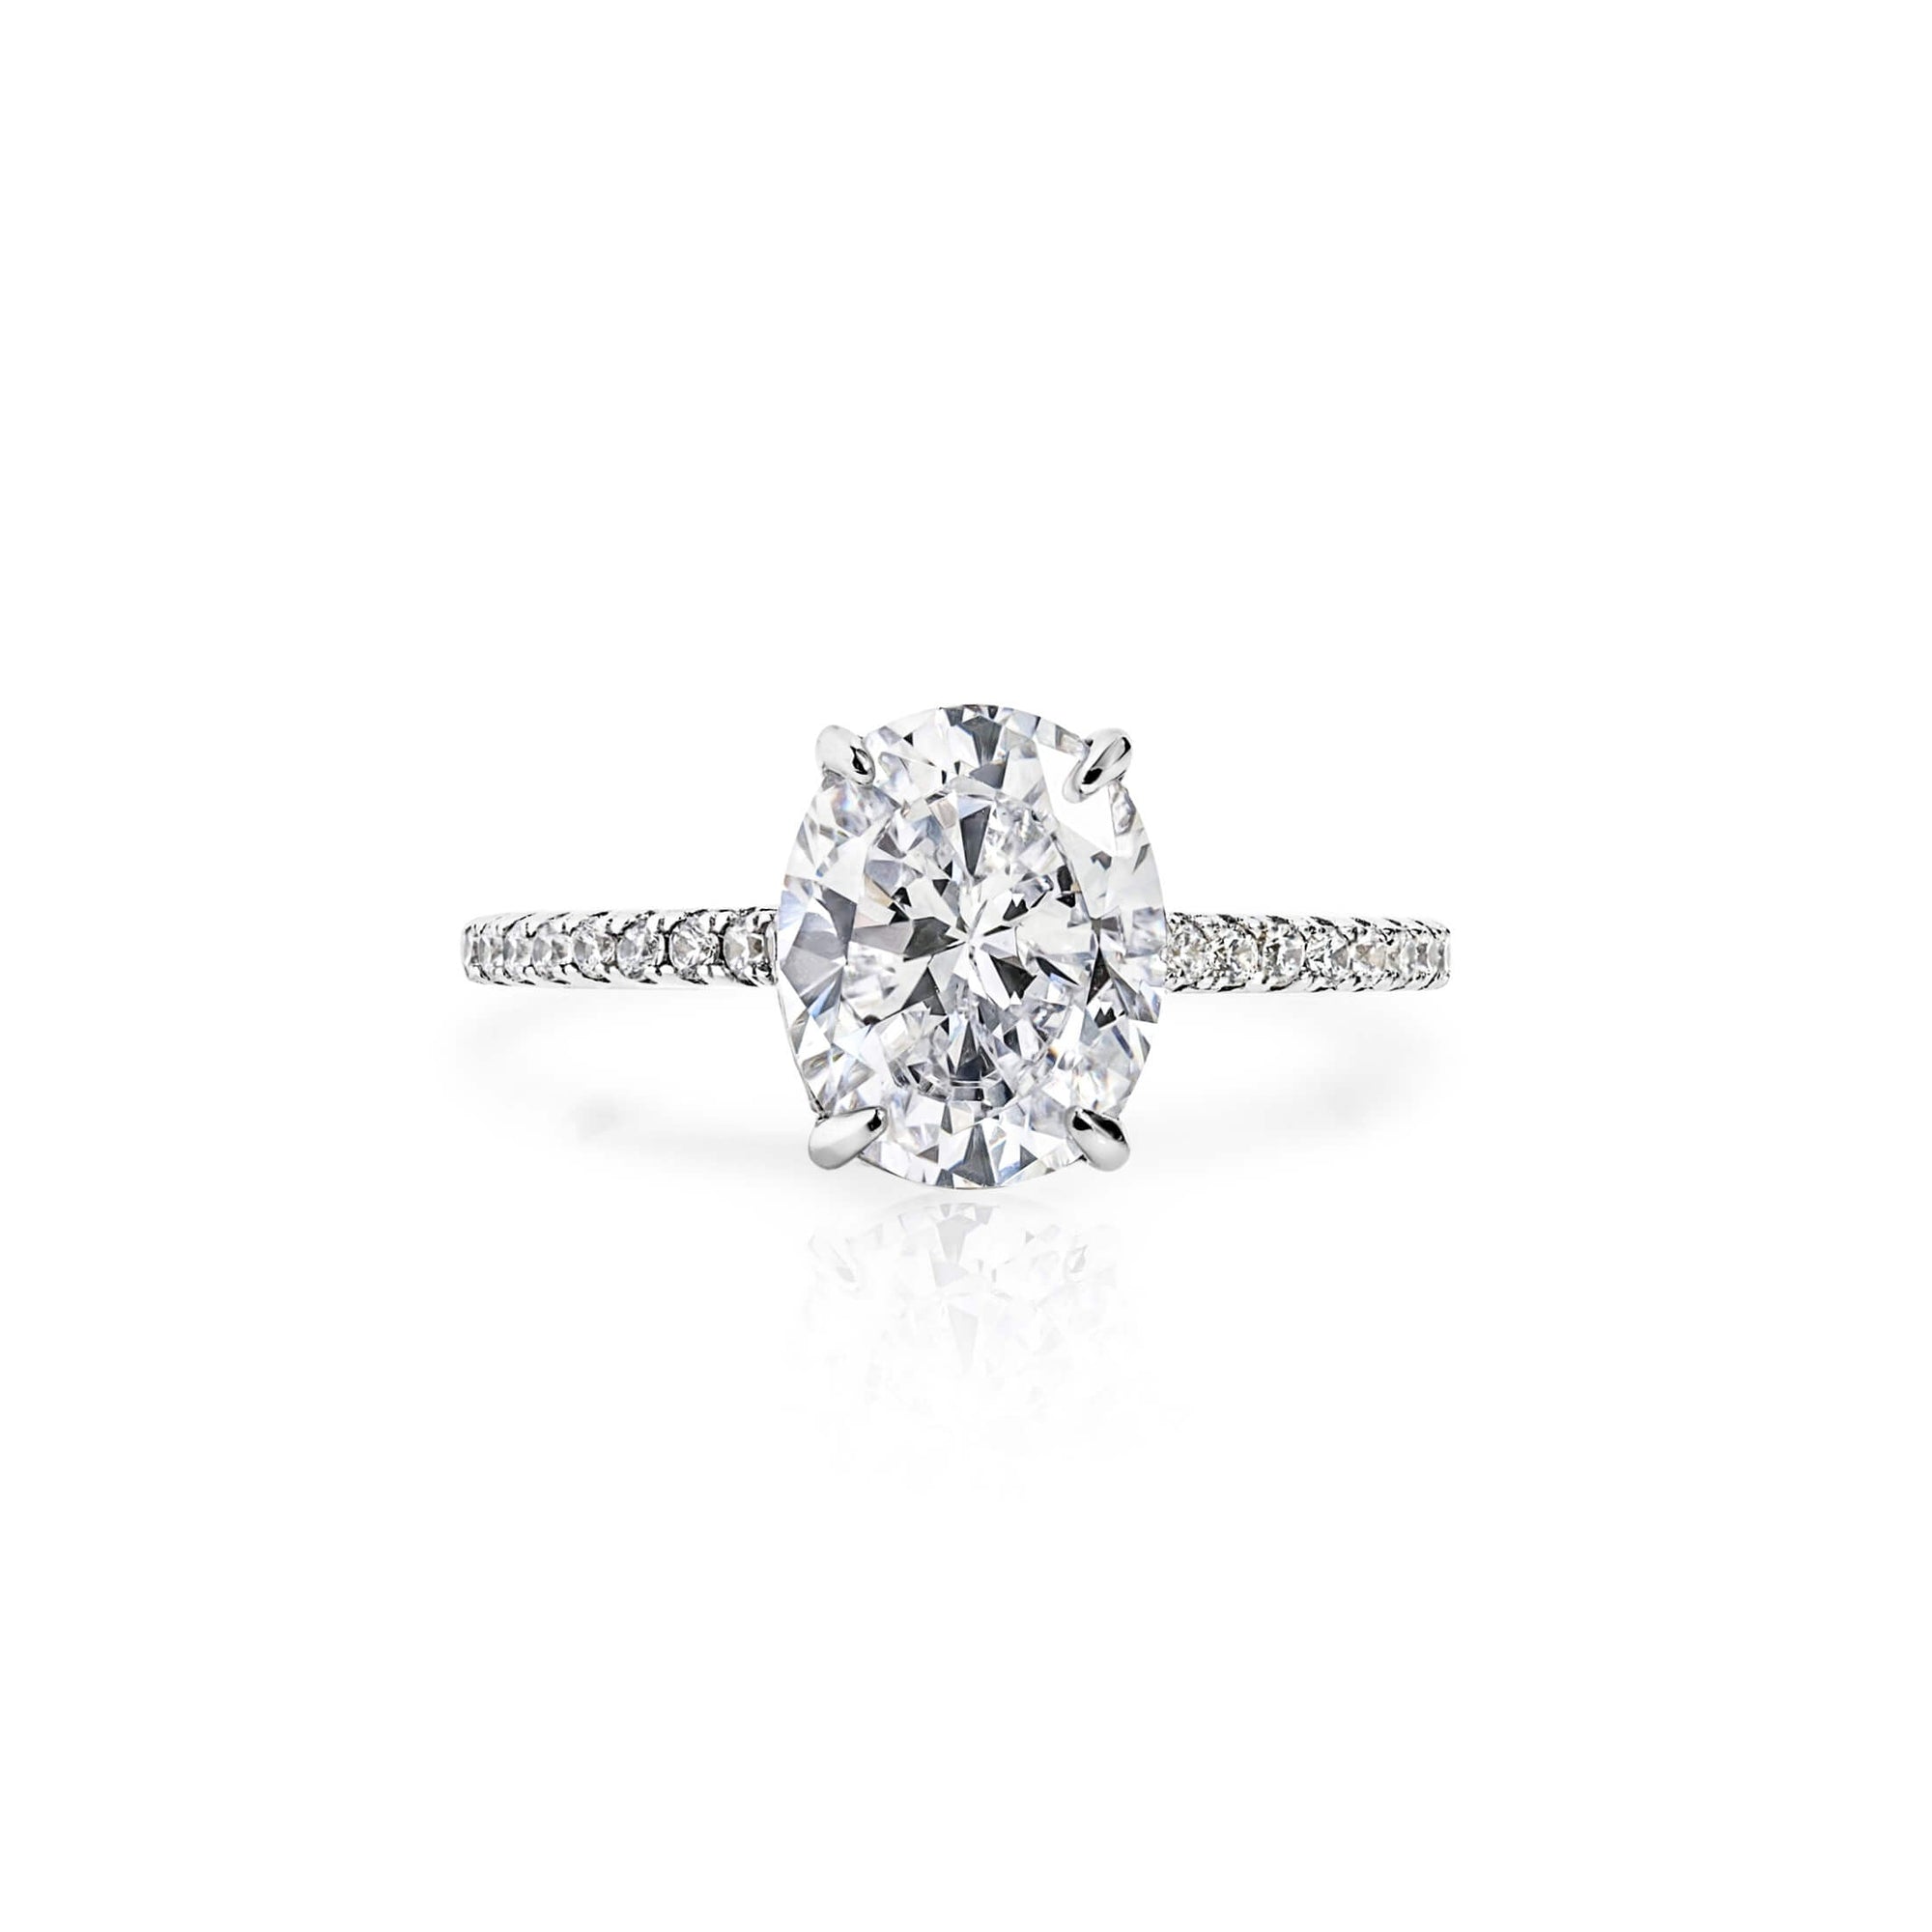 HIDDEN HALO ENGAGEMENT RING - Trove & Co.